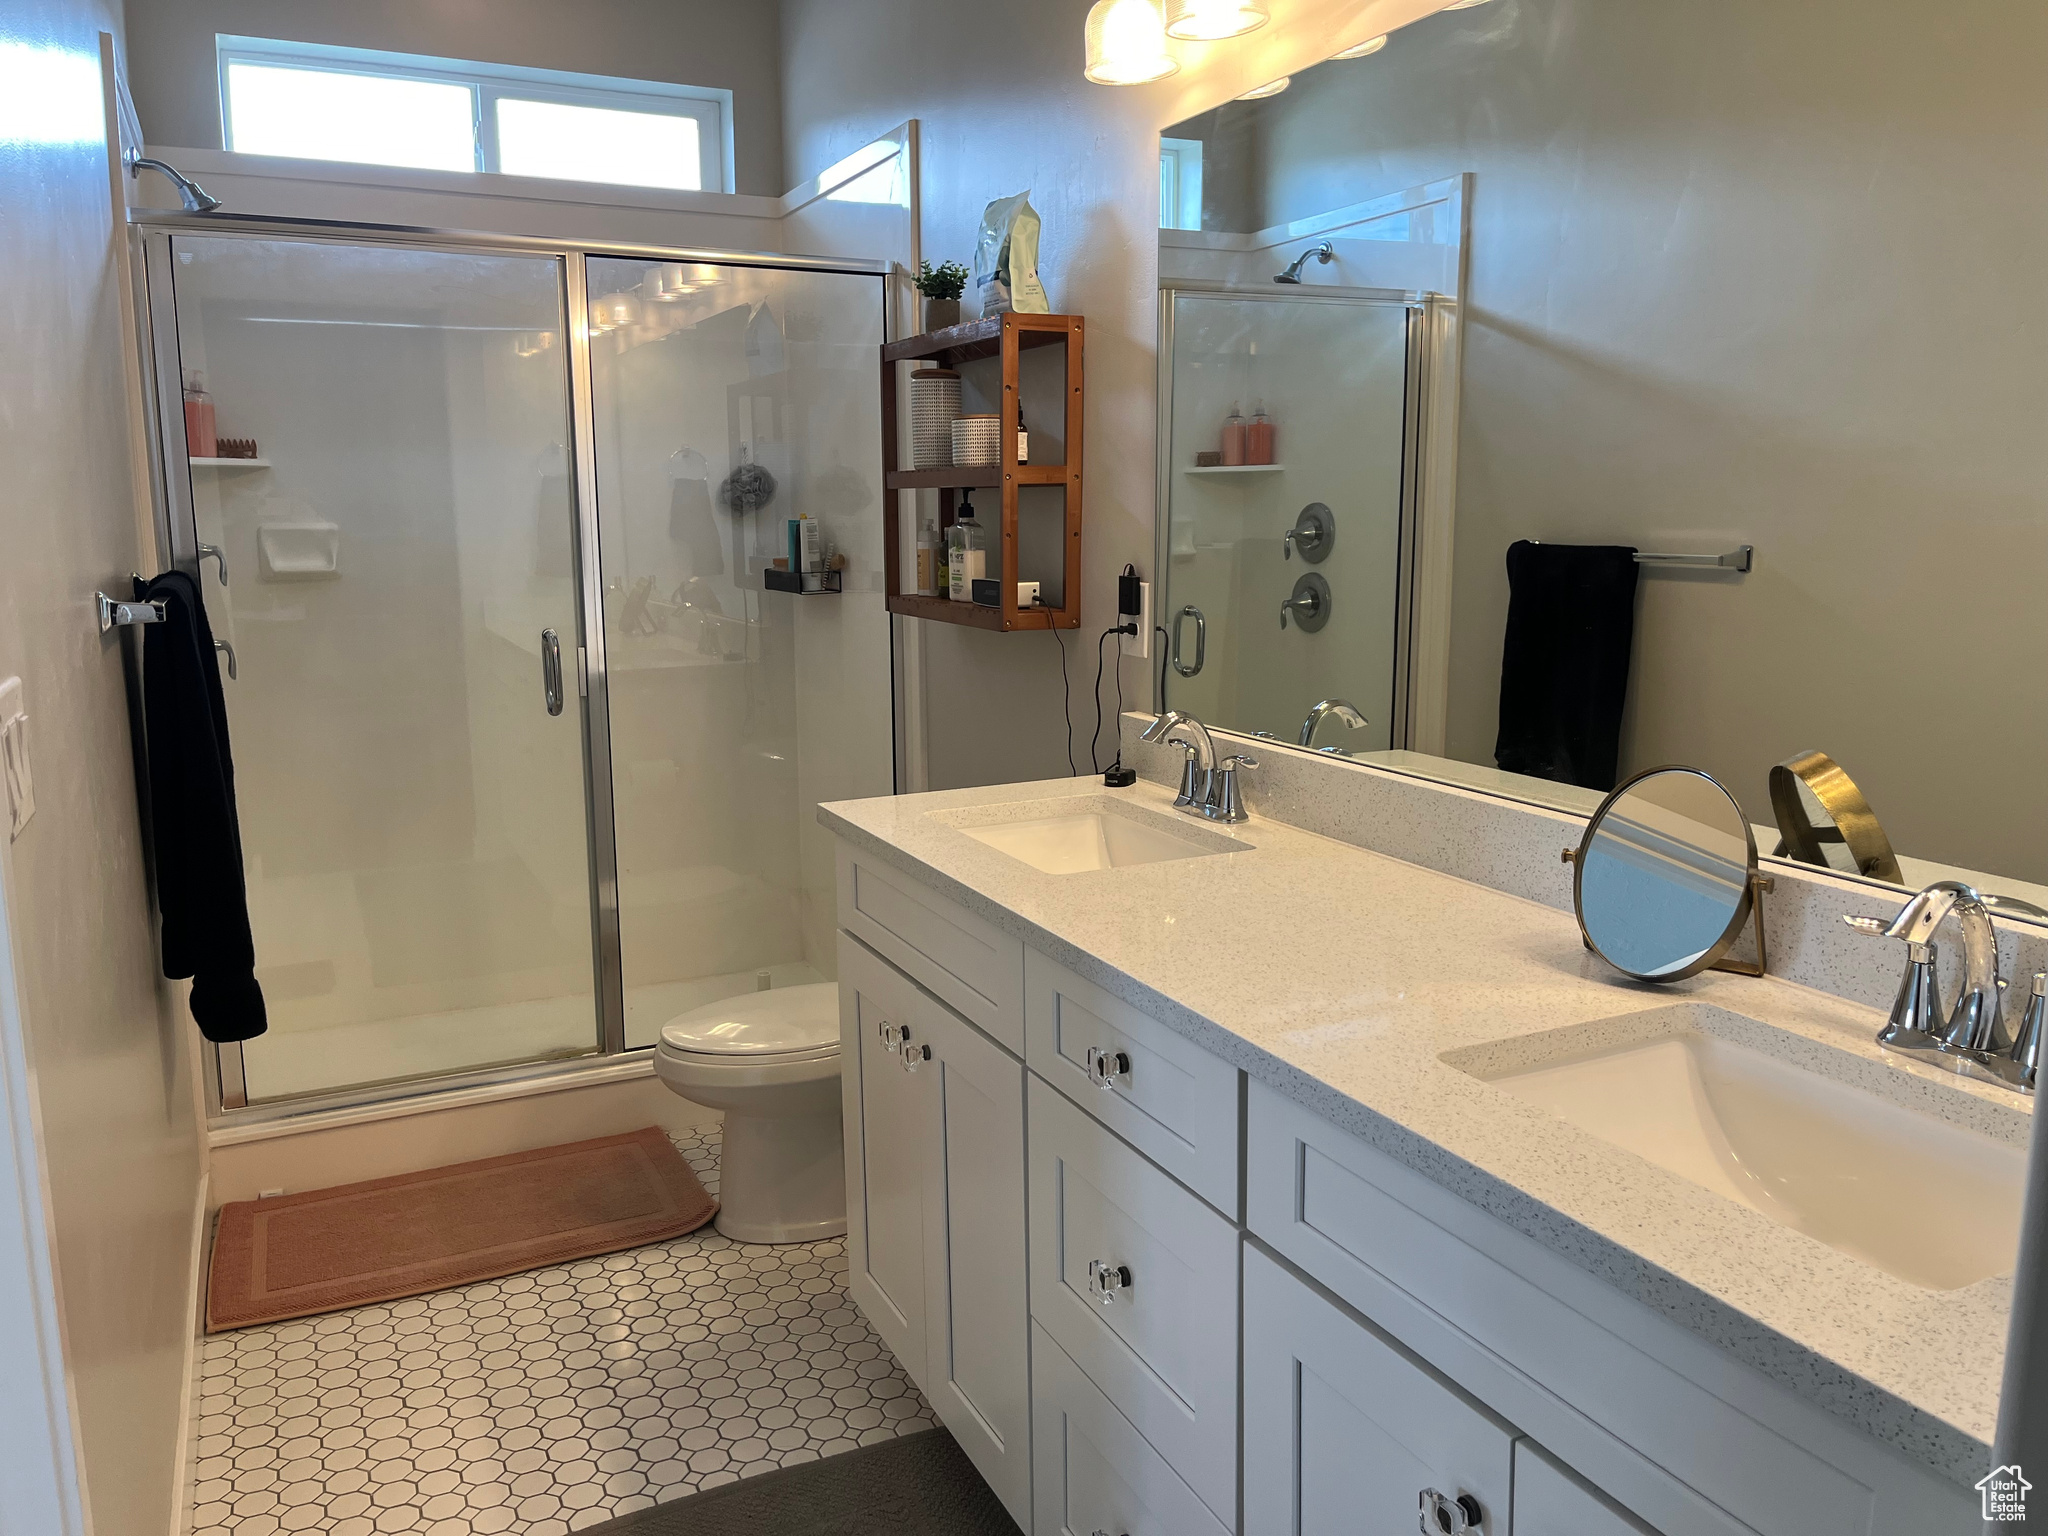 Main Bathroom with an enclosed shower, dual bowl vanity, toilet, and tile flooring